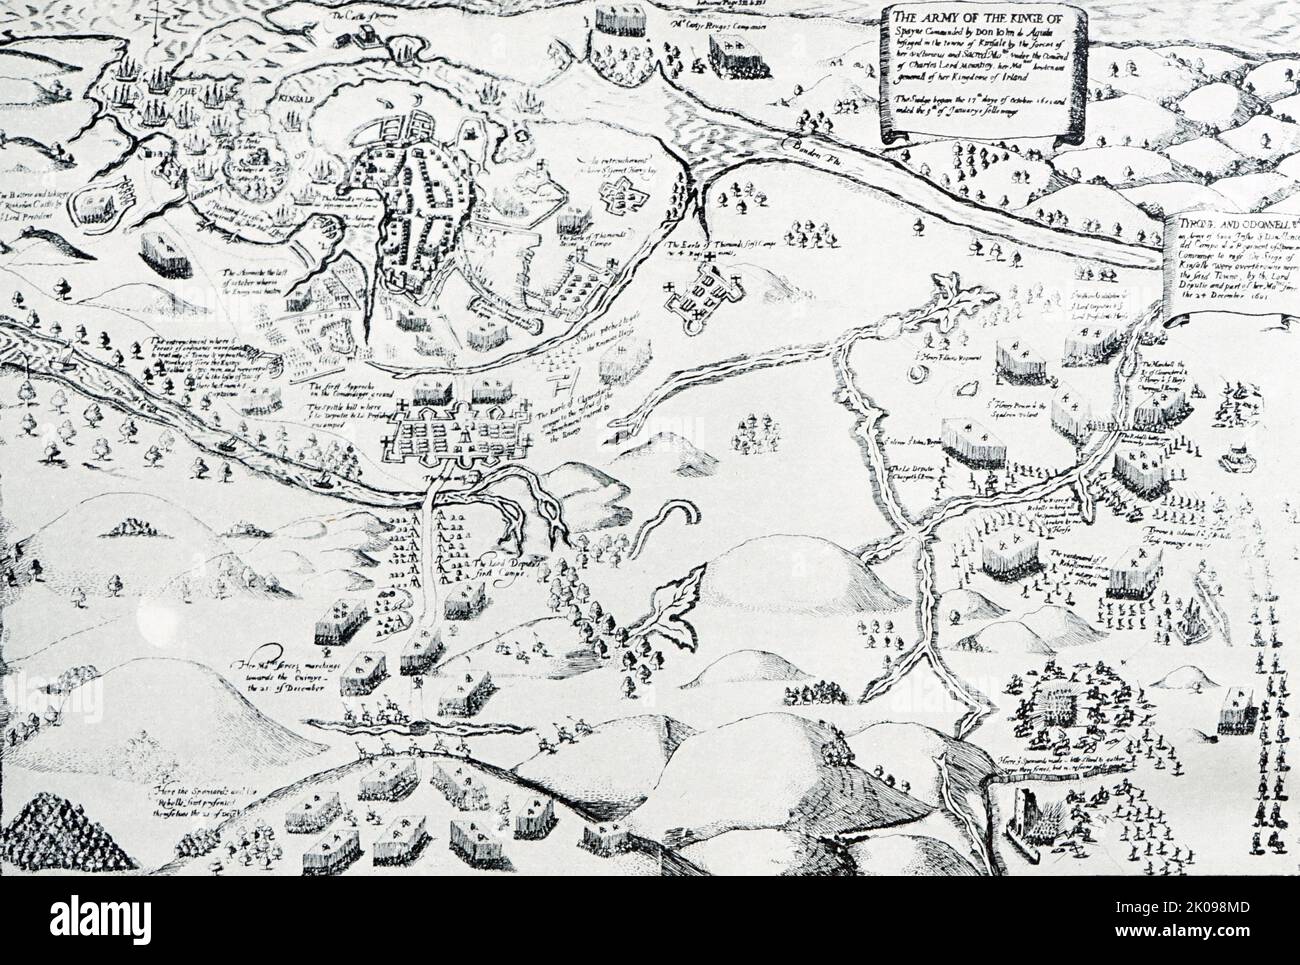 Panoramic drawing of the Siege and Battle of Kinsale by George Carew. The siege of Kinsale, or Battle of Kinsale, was the ultimate battle in England's conquest of Gaelic Ireland, commencing in October 1601, near the end of the reign of Queen Elizabeth I, and at the climax of the Nine Years' War--a campaign by Hugh O'Neill, Hugh Roe O'Donnell and other Irish lords against English rule. Stock Photo